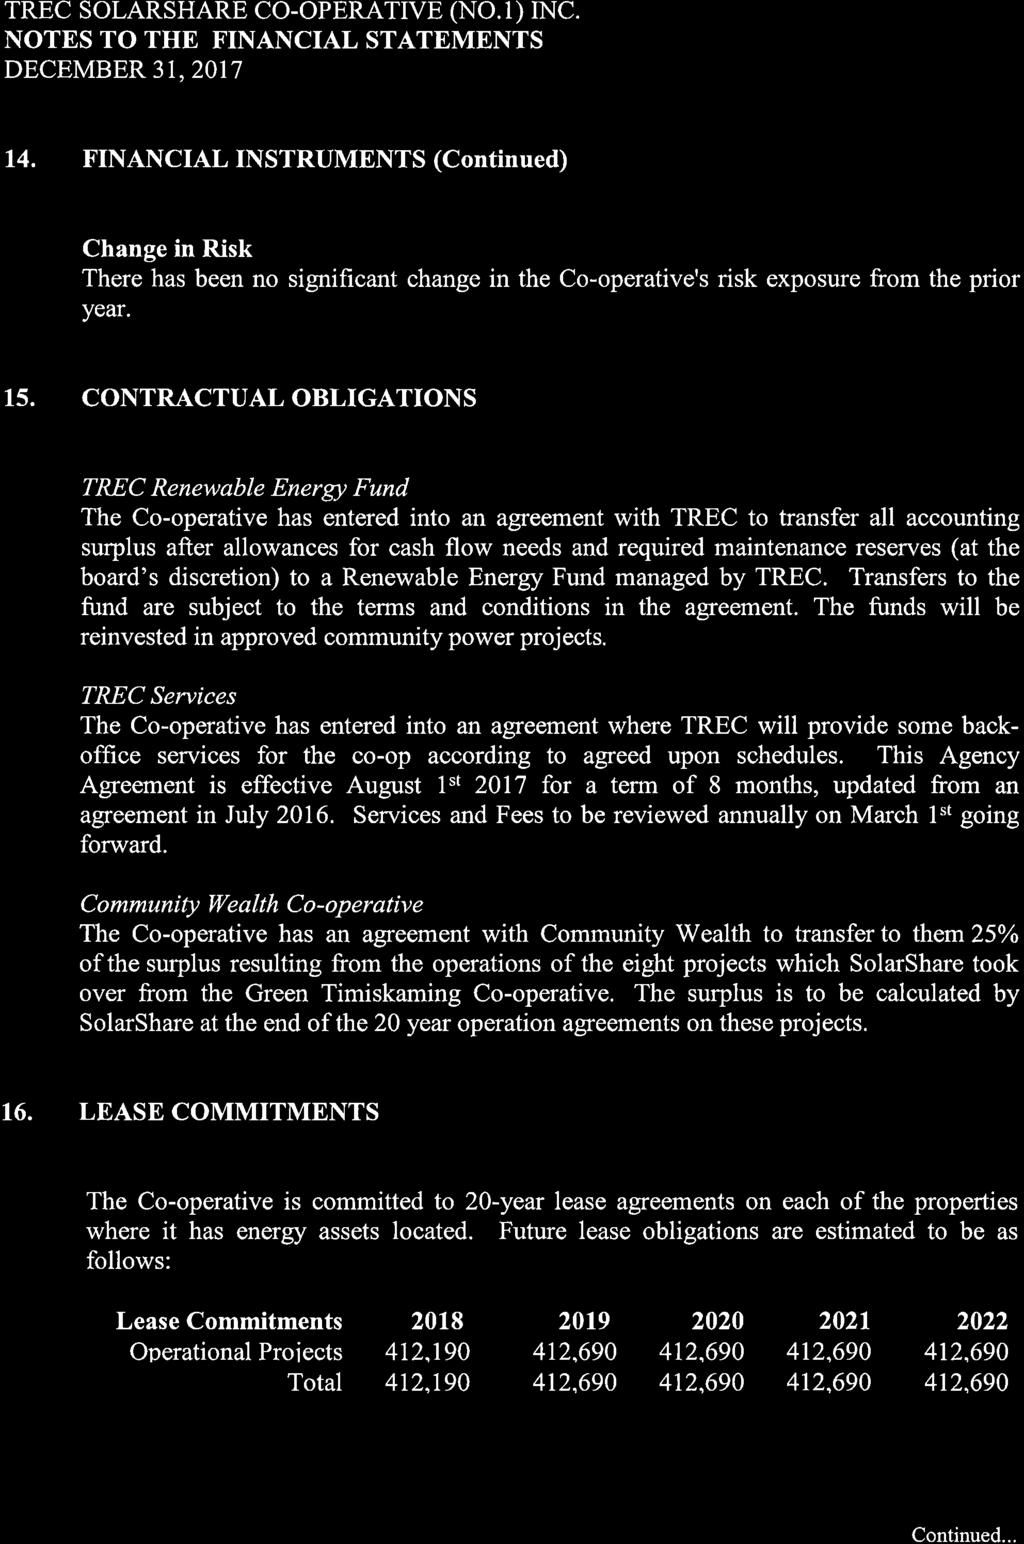 TREC SOLARSHARE CO-OPERATTVE (NO.l) INC. NOTES TO THE FINANCIAL STATEMENTS DECEMBER3I,2OI] Page 18 14.